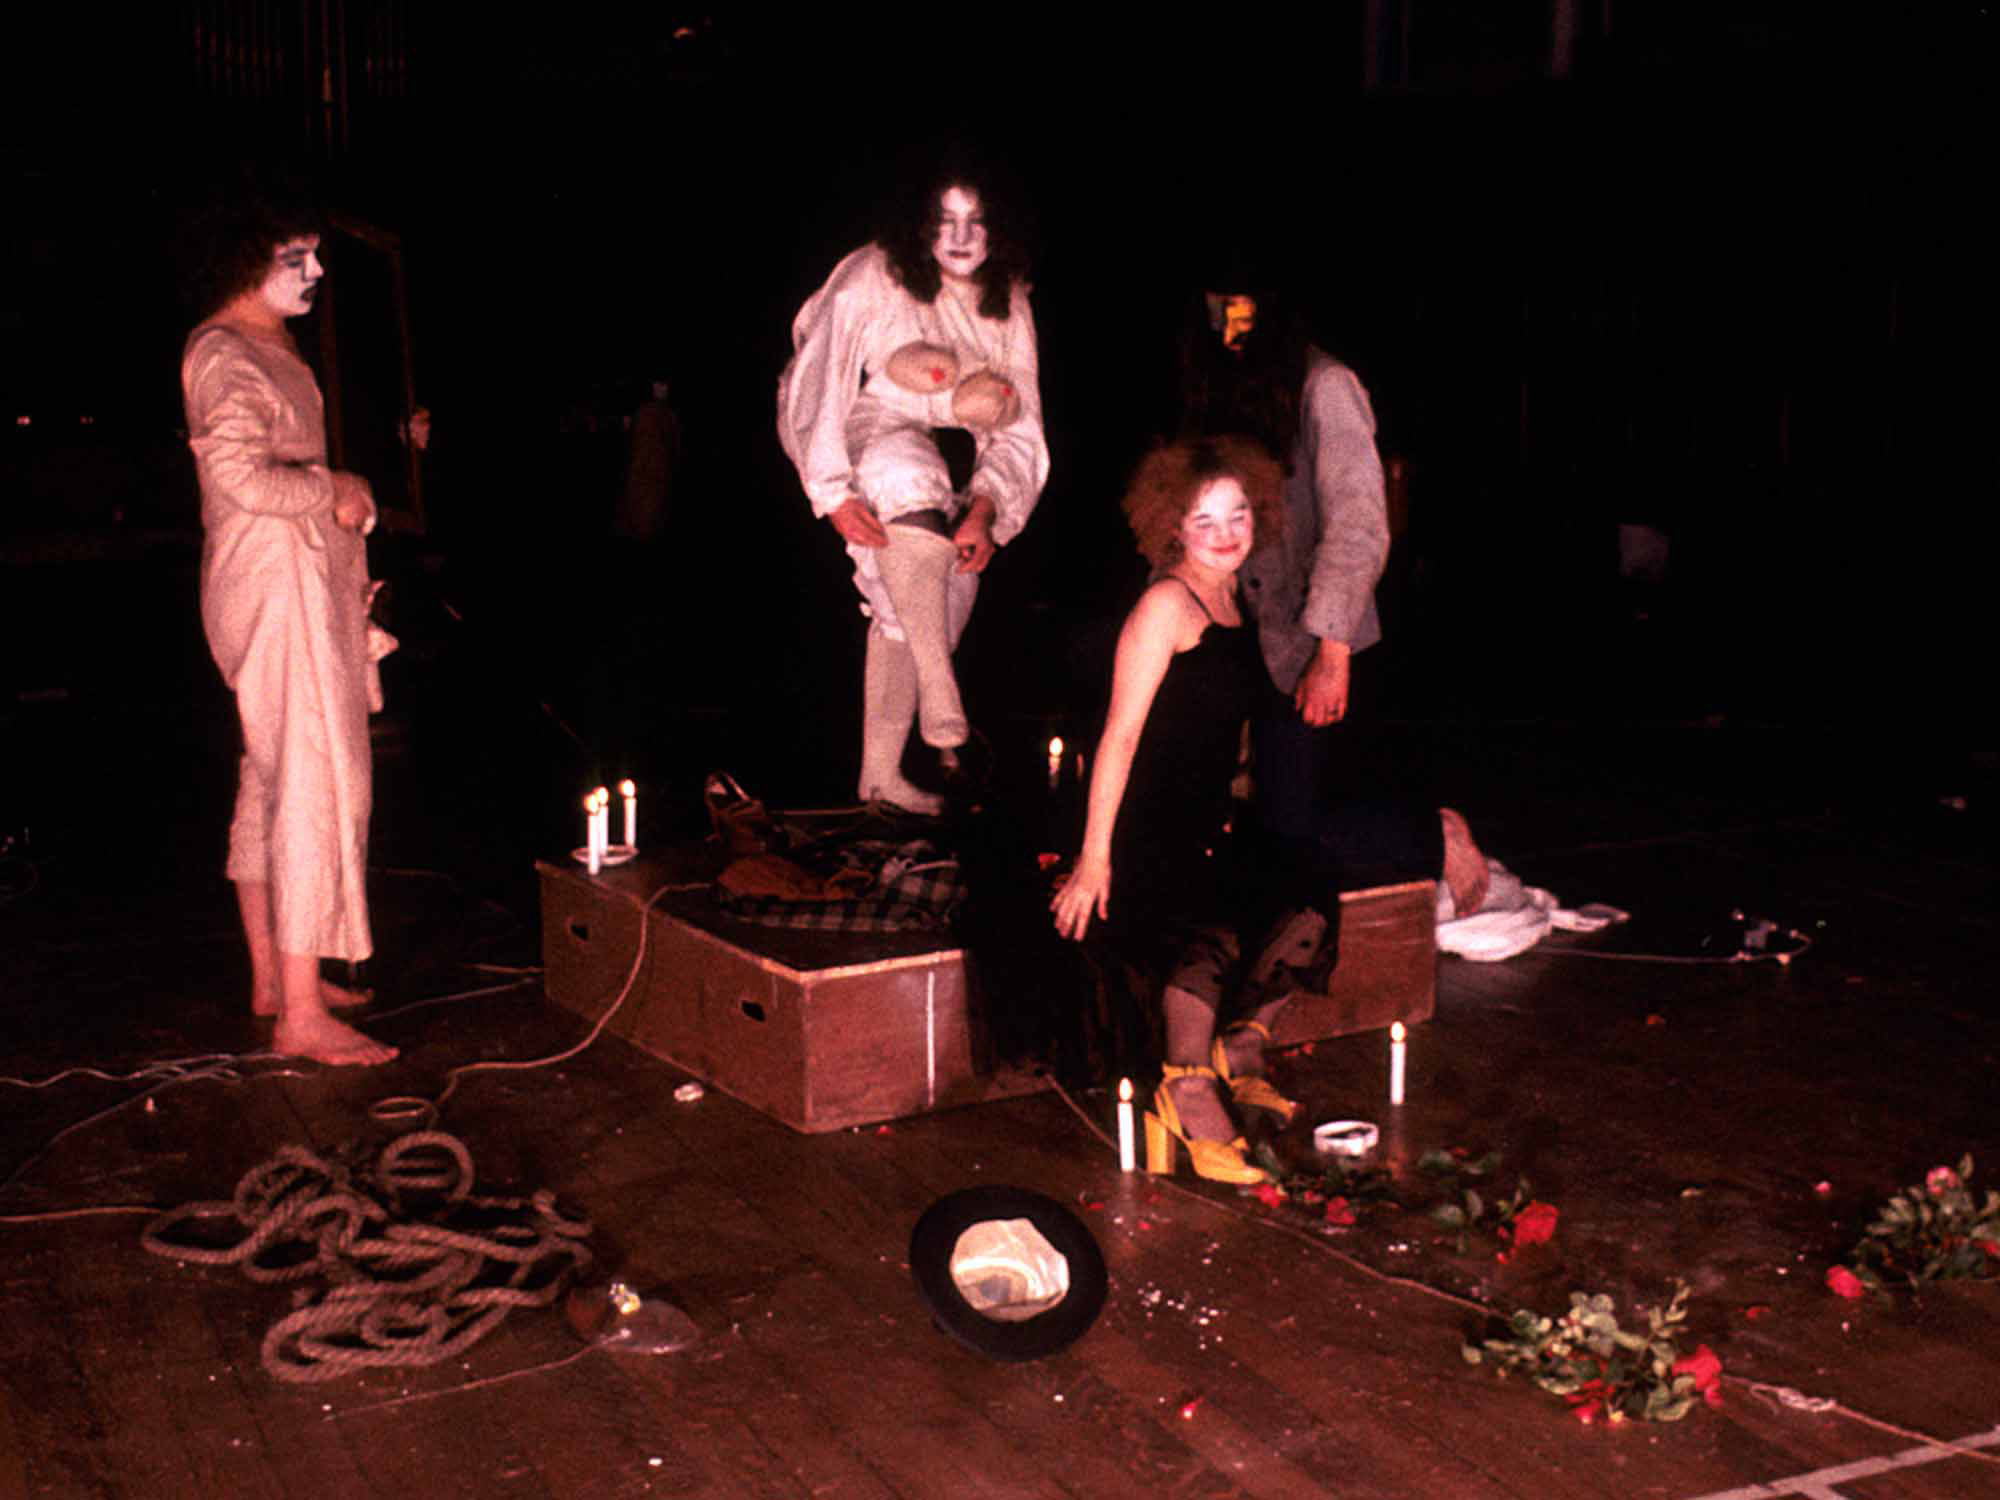 Anne Bean, Swapping Body Parts, 1971 with Graham Challifour, Jill Jones & Rod Melvin. 4 dimensions of God